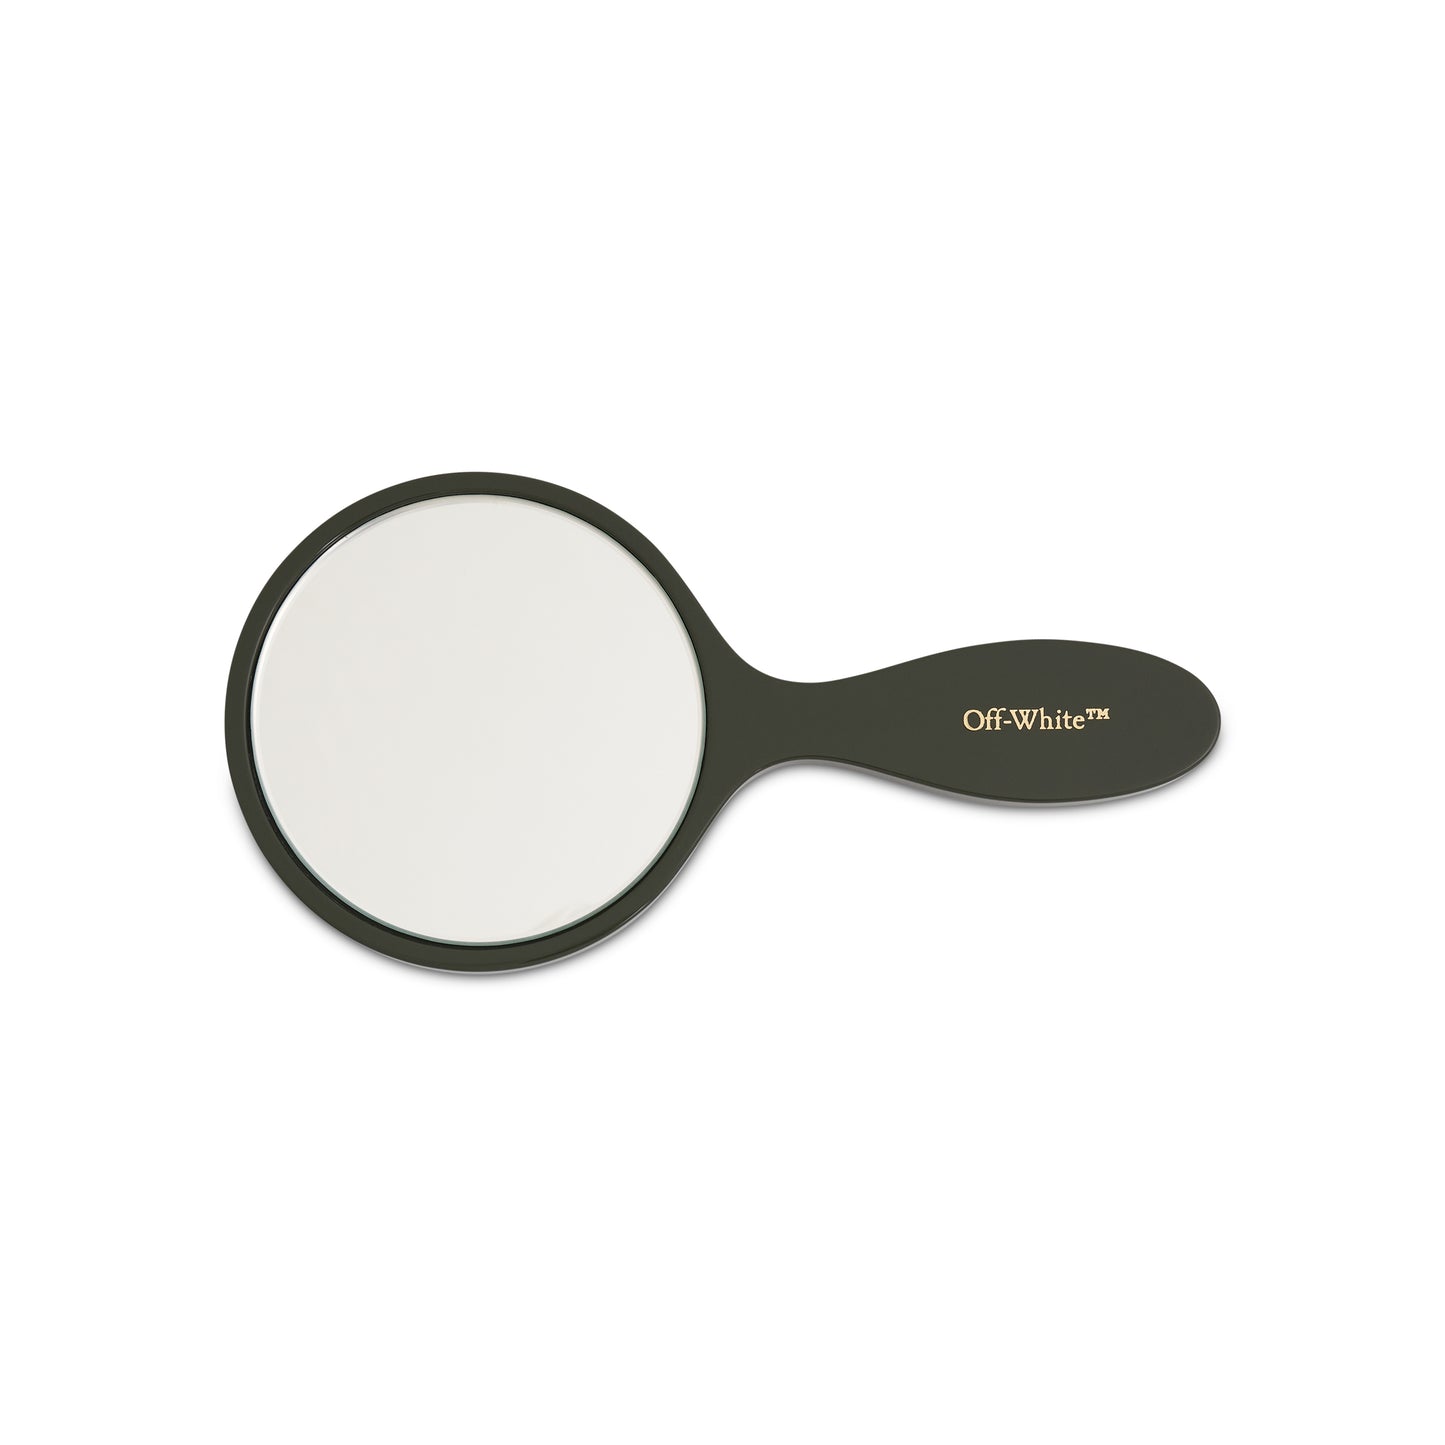 Bookish Hand Mirror in Army Green